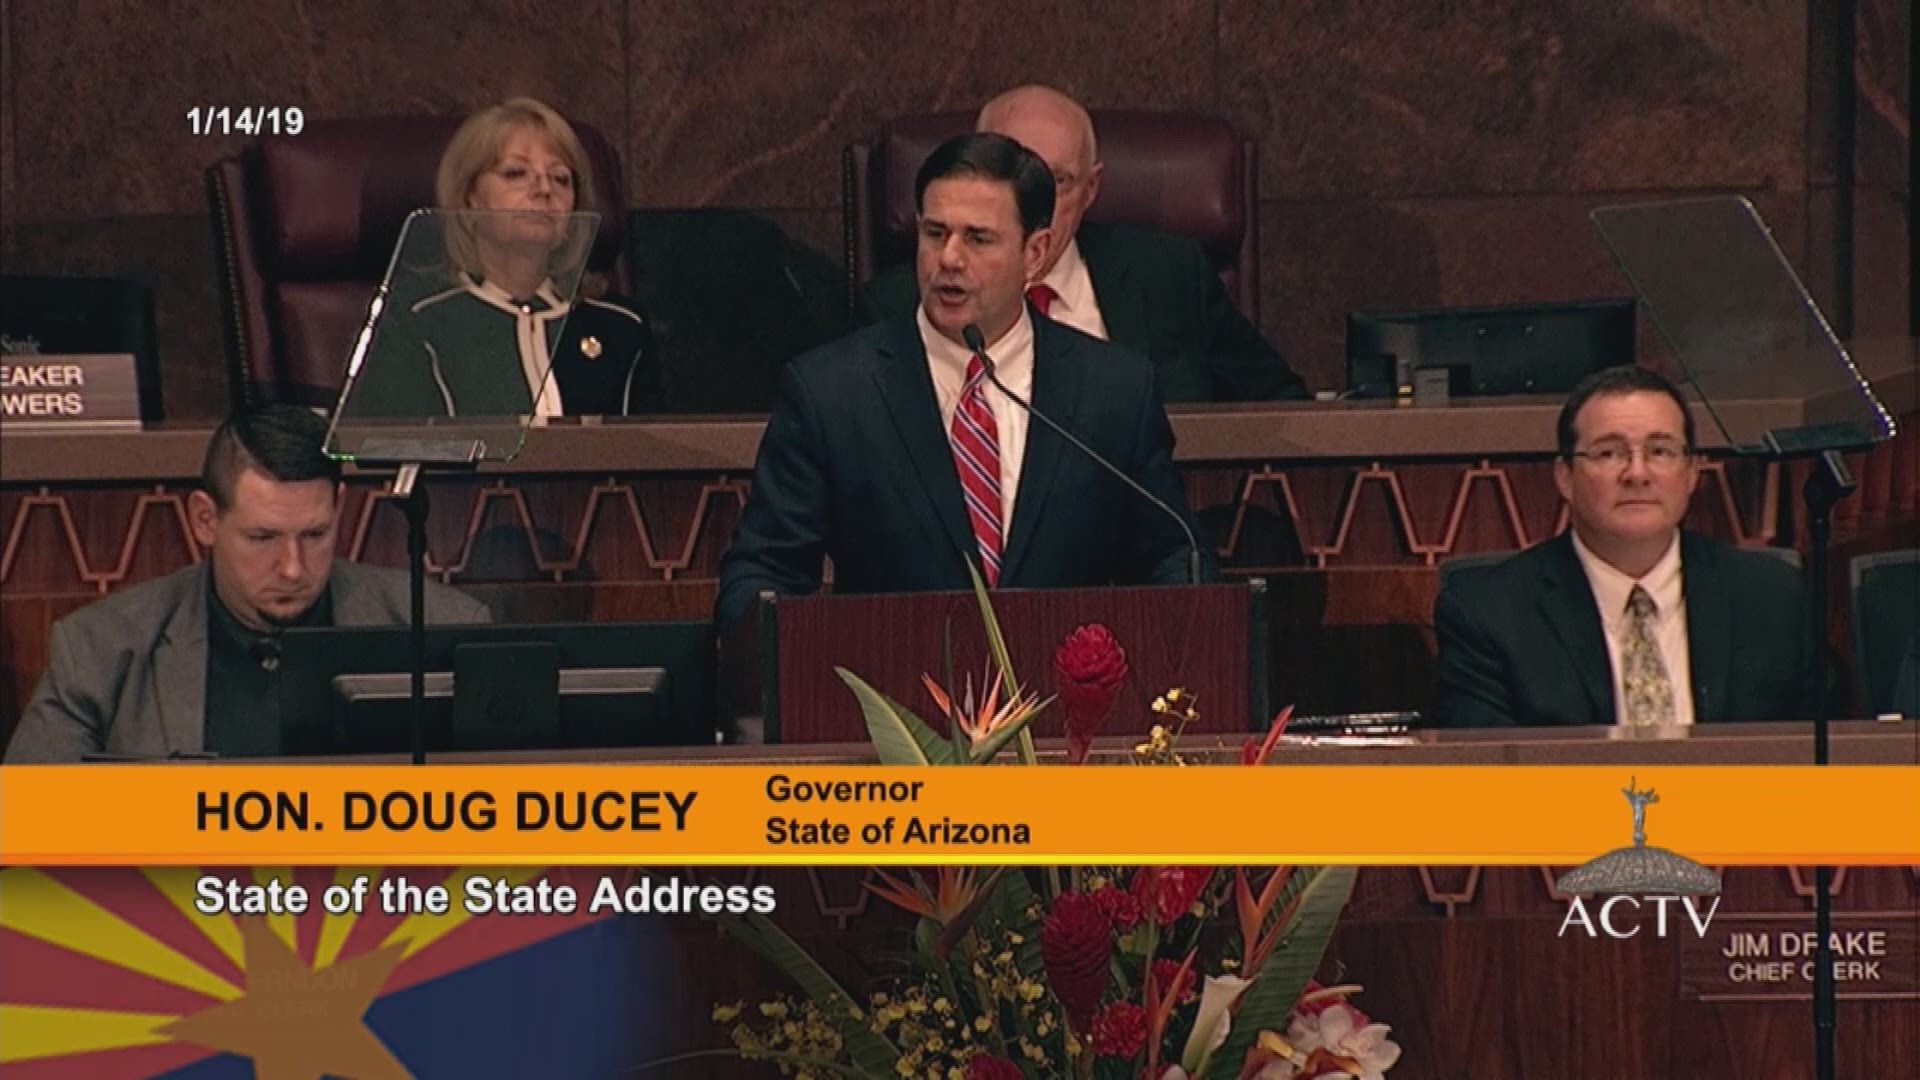 In his State of the State address, Arizona Governor Doug Ducey announced that the state is buying back its capitol building. The building was sold in 2009 by then-Governor Jan Brewer to help make up for a hole in the budget.